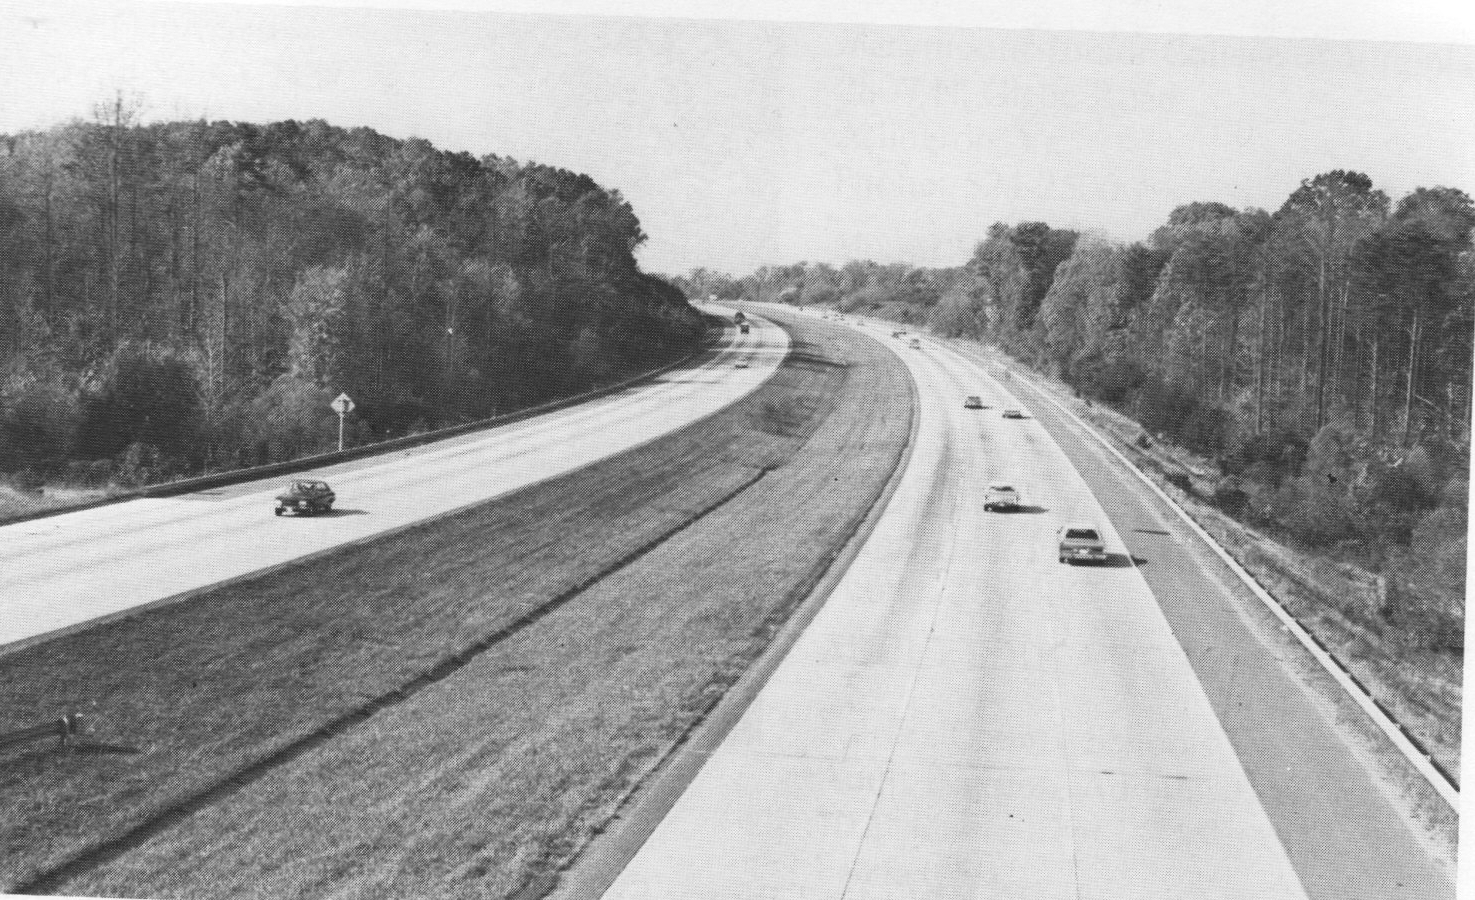 Rush Hour on the Beltway:  1960